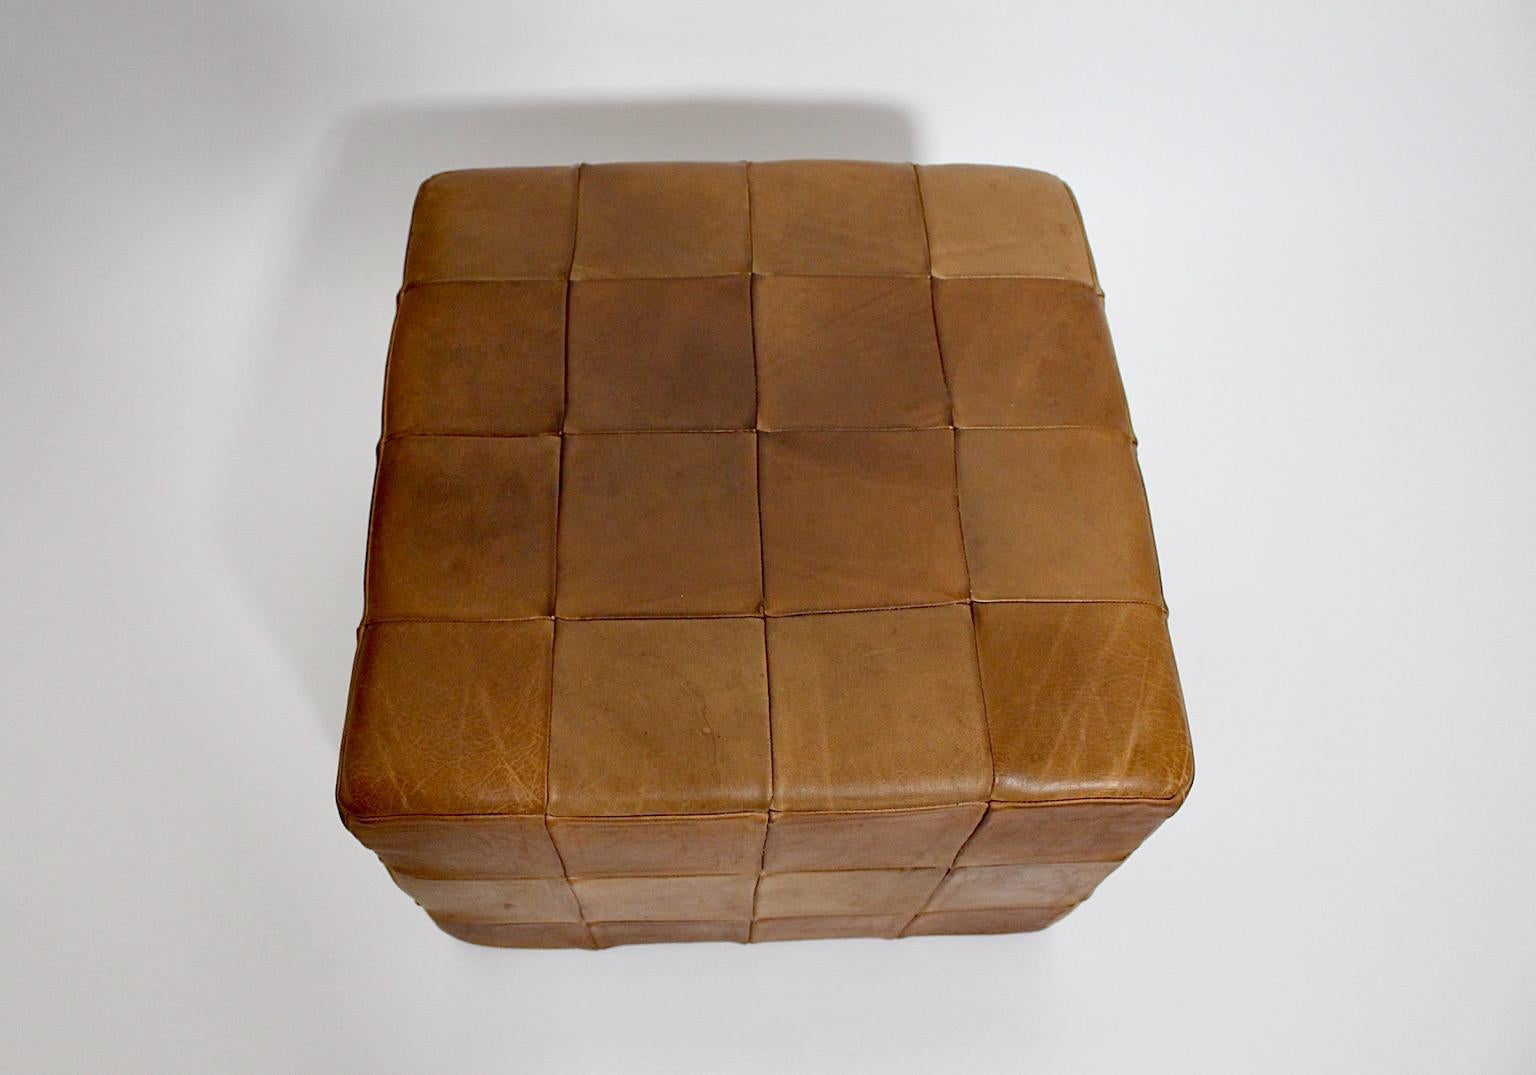 Modernist Organic Vintage Brown Patchwork Leather Cubus Stool DeSede 1970s For Sale 5